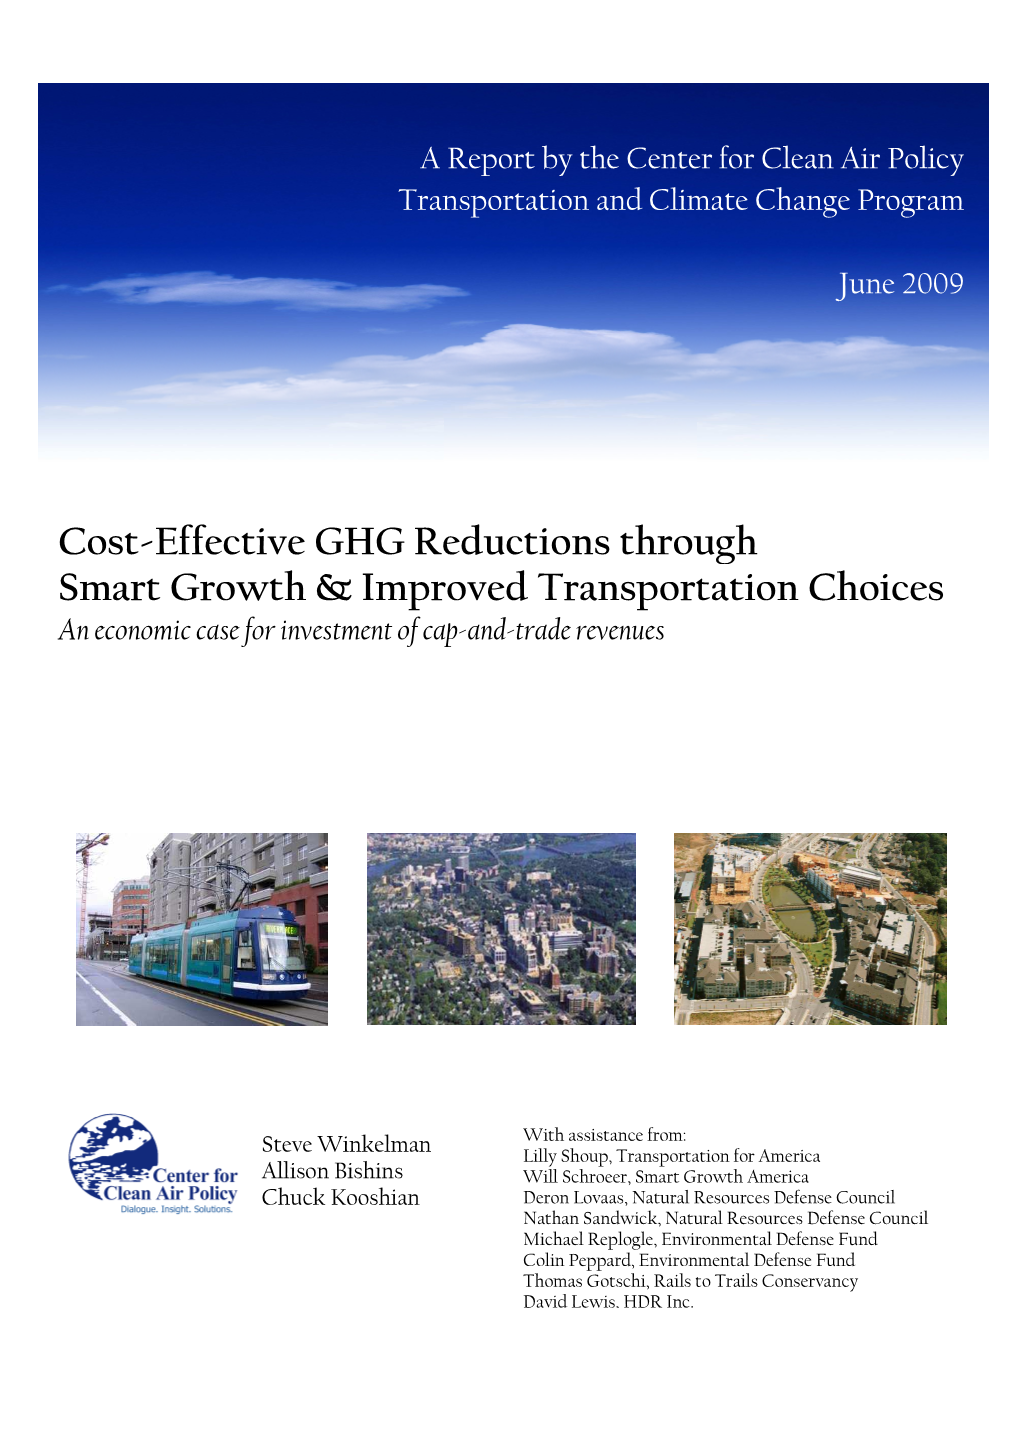 CCAP June 2009 Report on Cost-Effective Smart Growth And